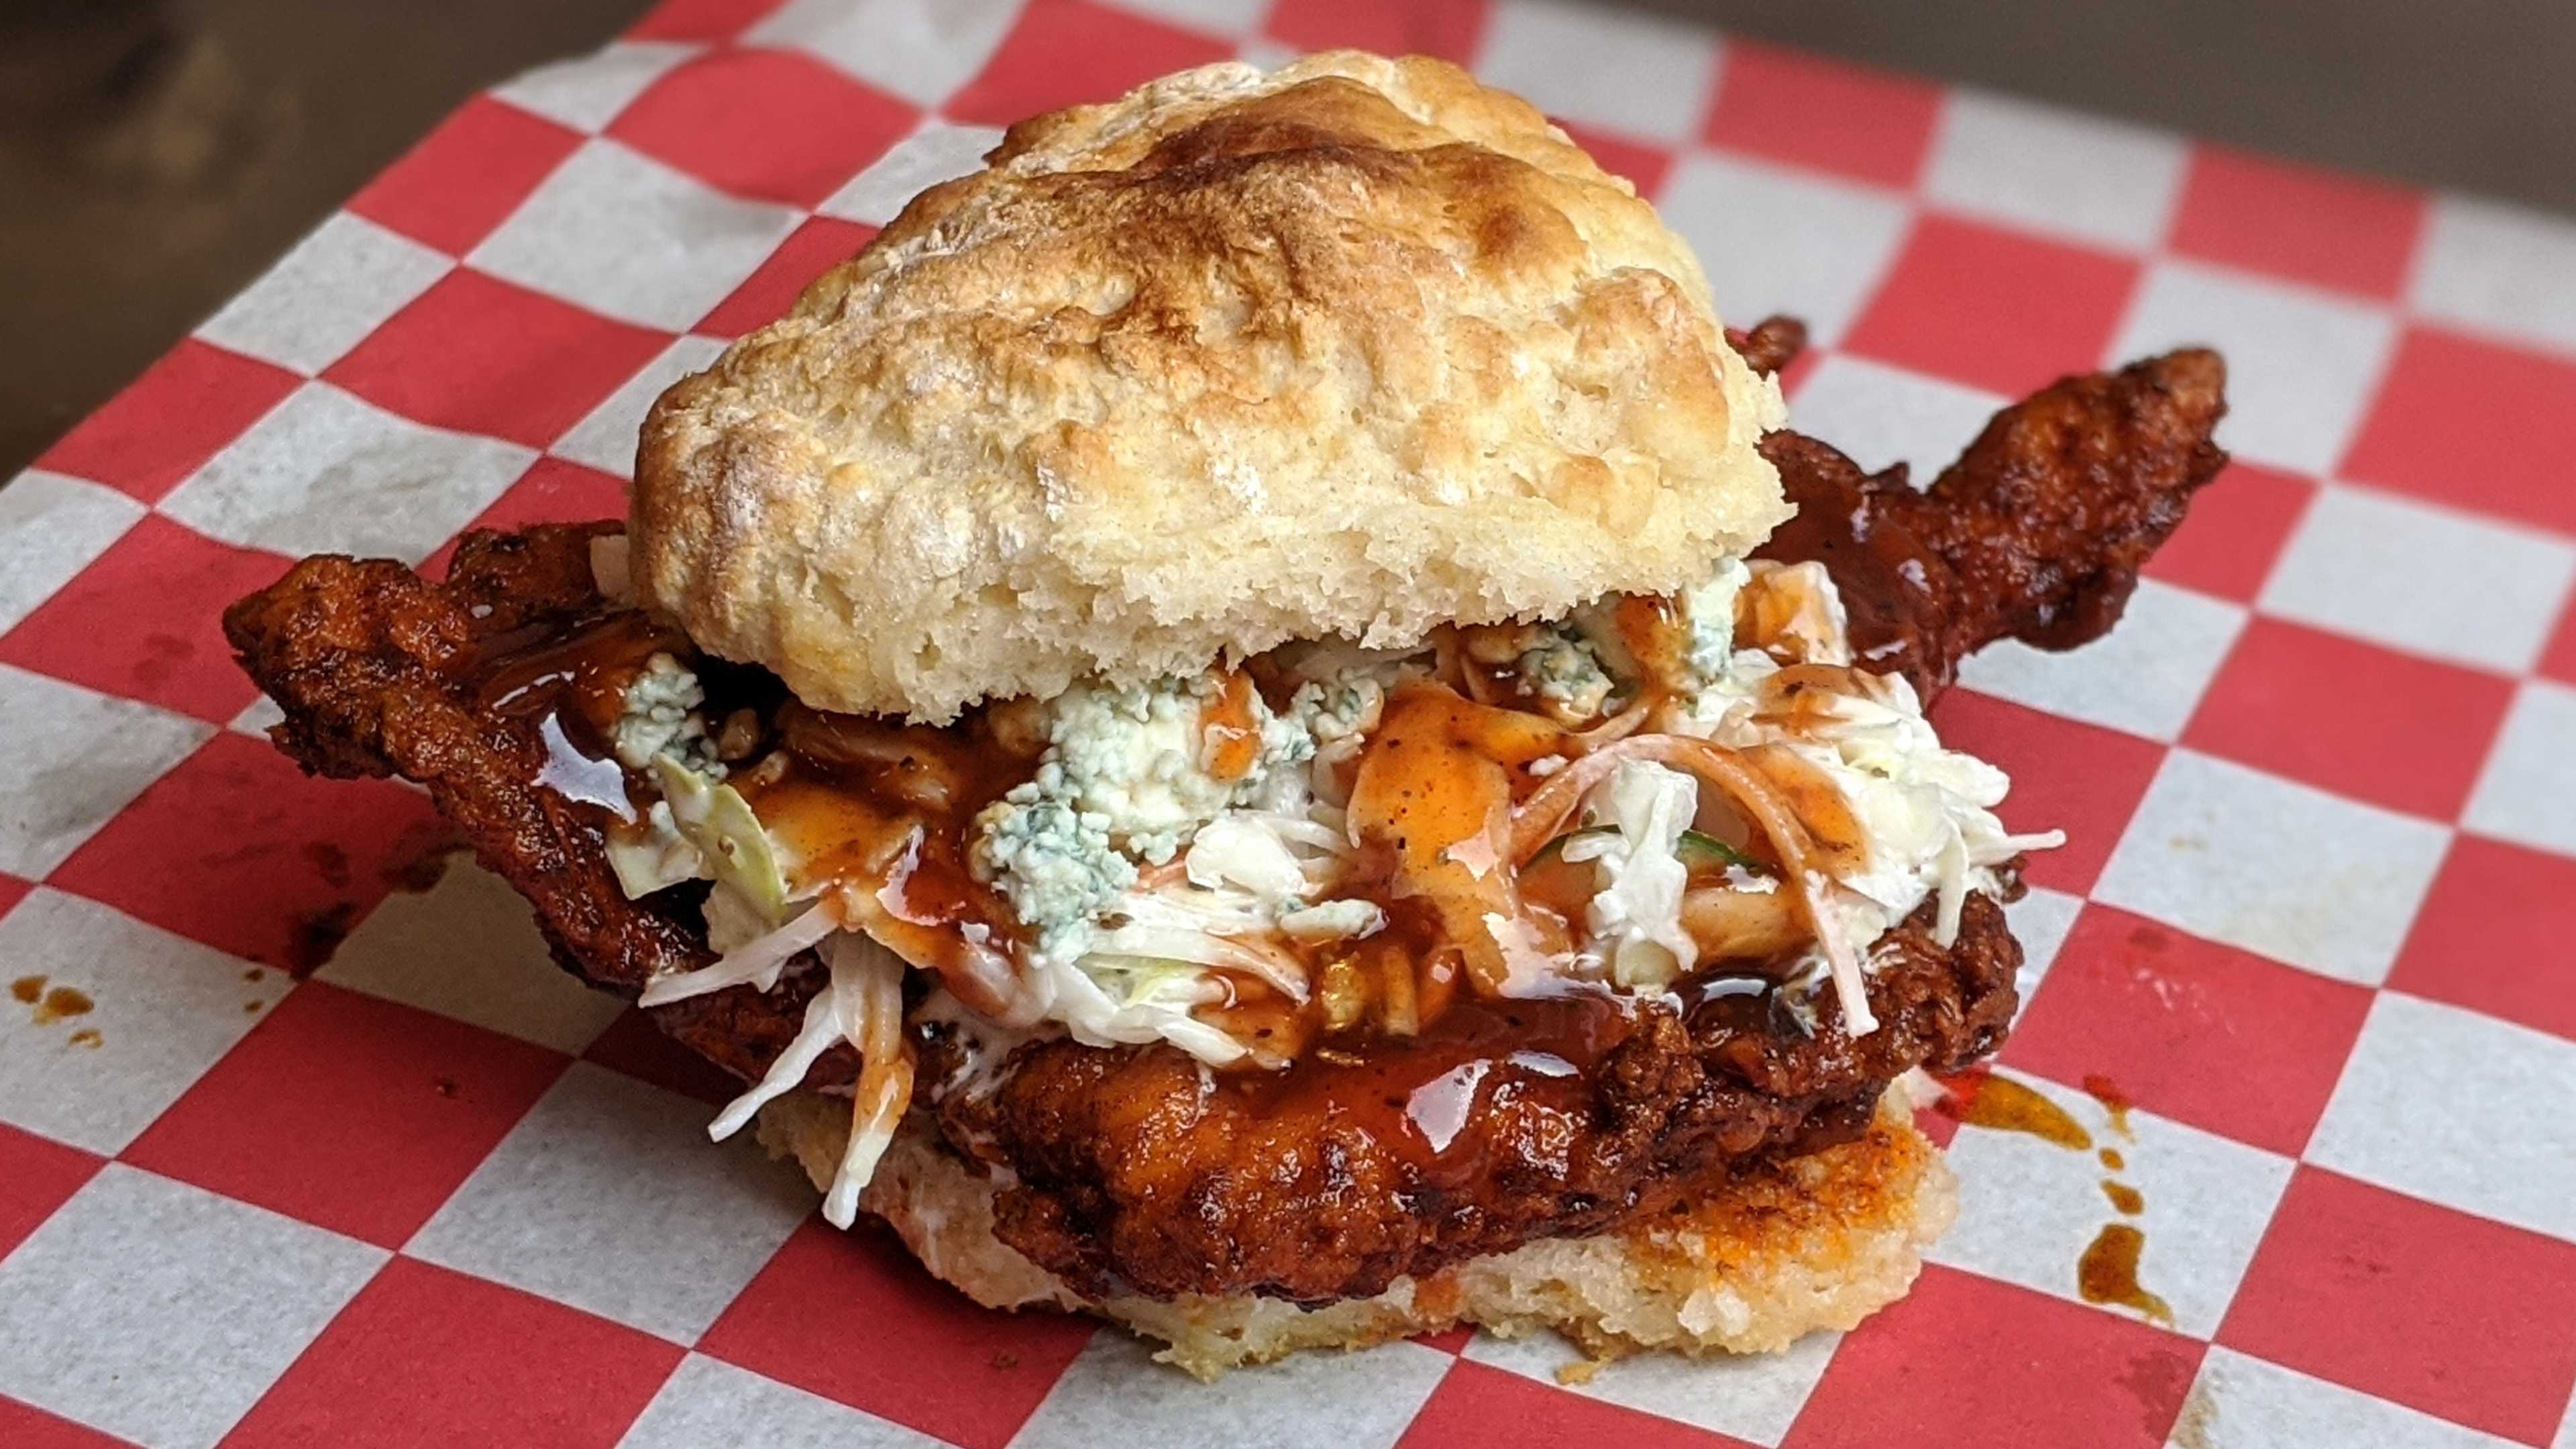 A chicken biscuit sandwich from The Roost.